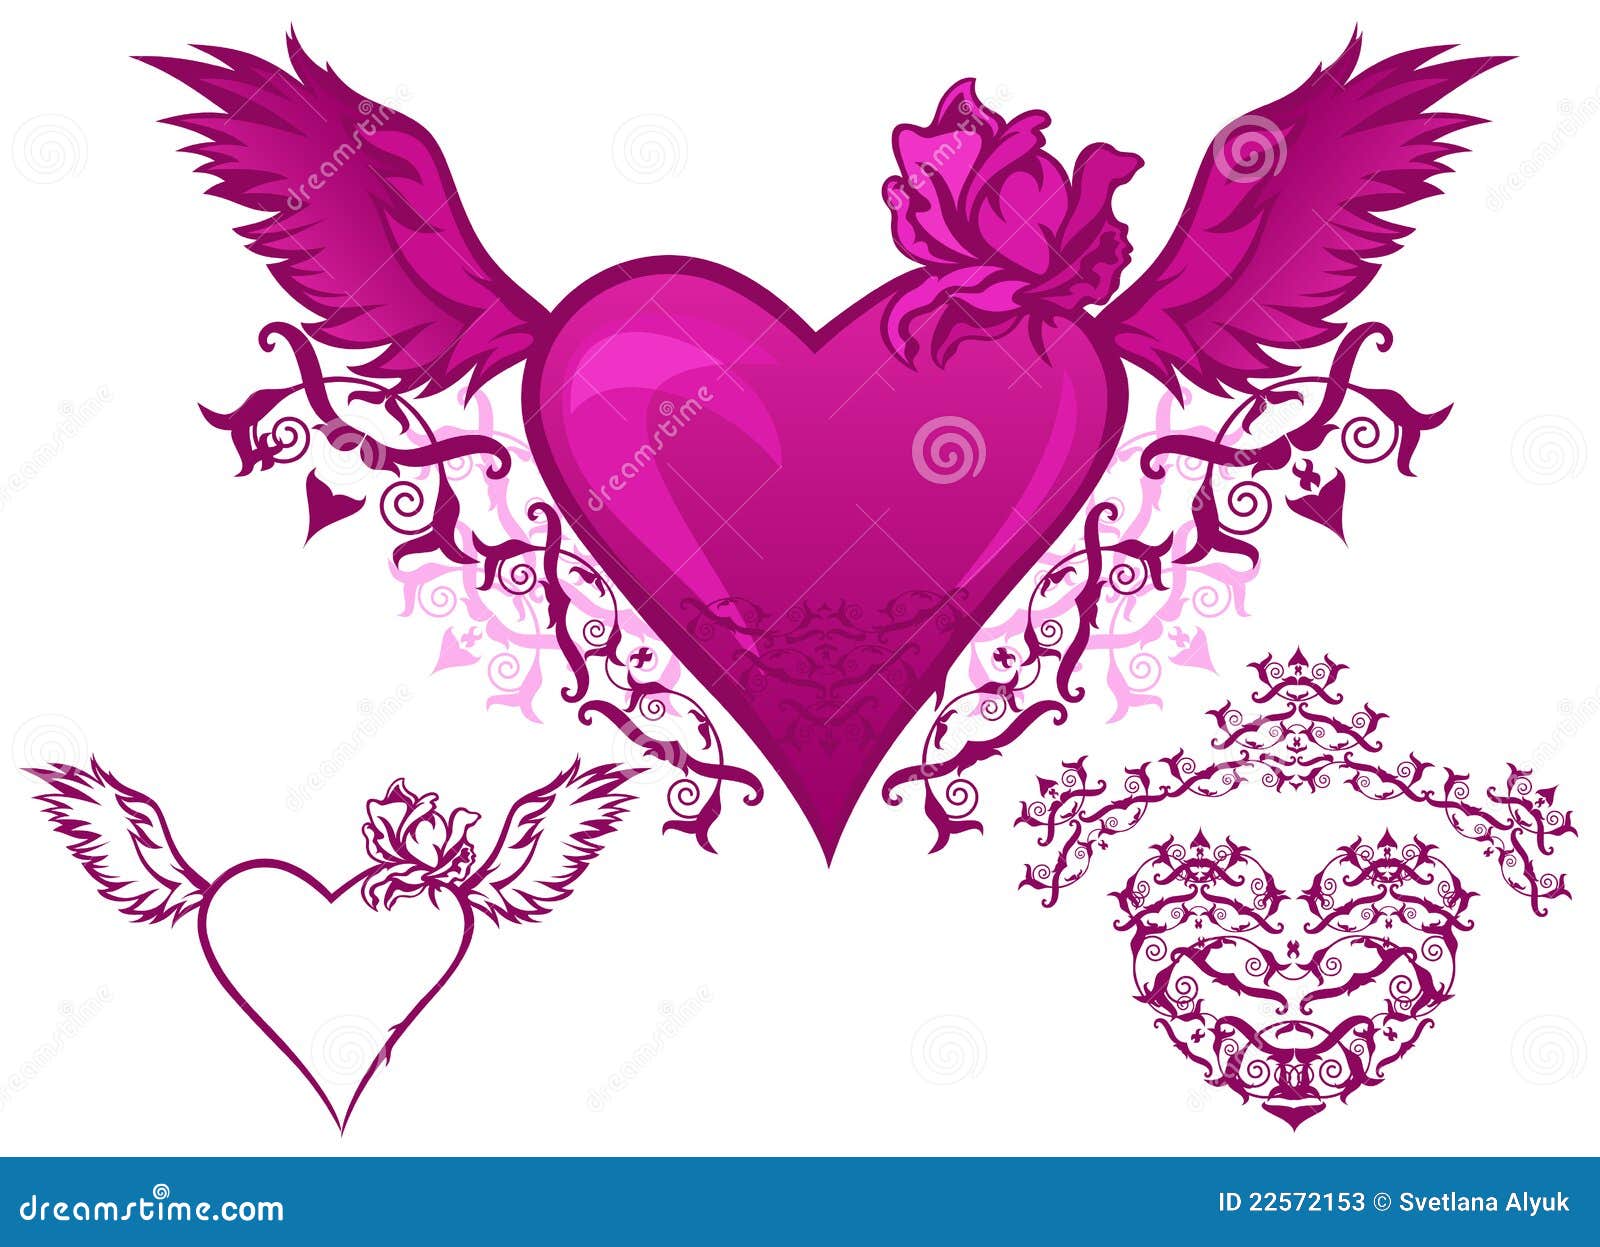 Winged hearts vector stock vector. Illustration of valentine - 22572153